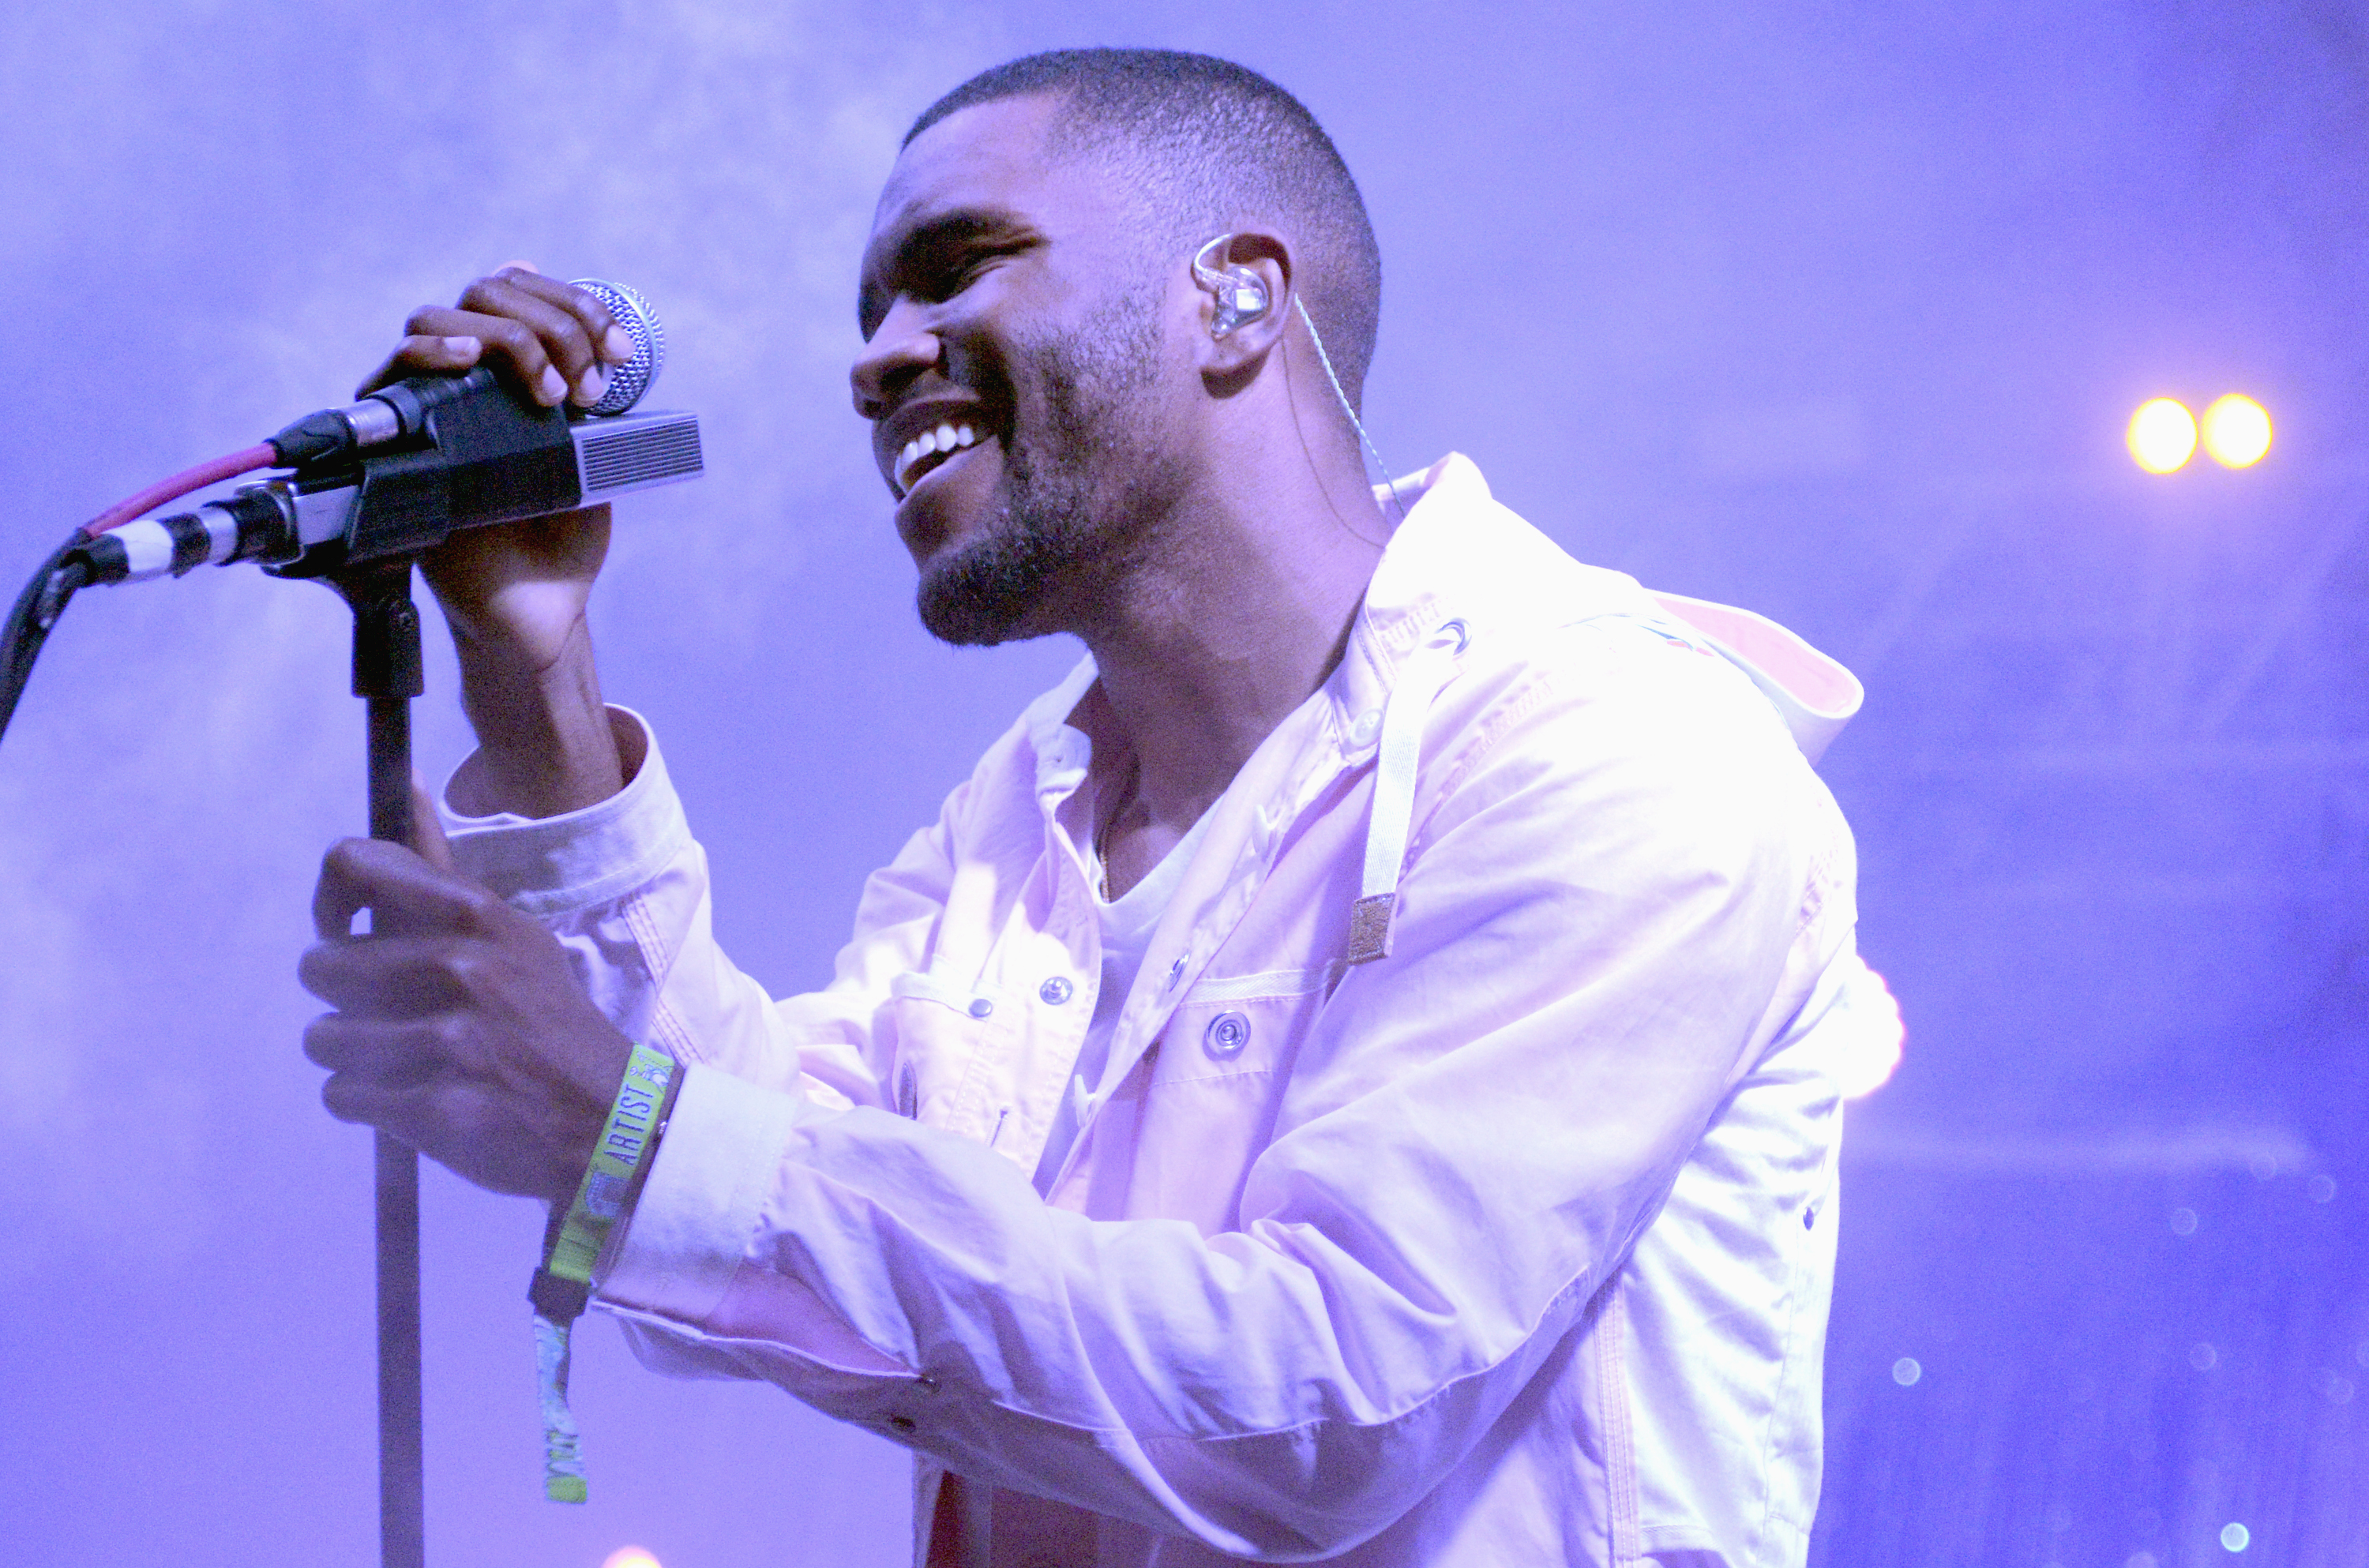 Frank Ocean during the performs during the 2014 Bonnaroo Music & Arts Festival in Manchester, Tennessee, on June 14, 2014. (Tim Mosenfelder—Getty Images)